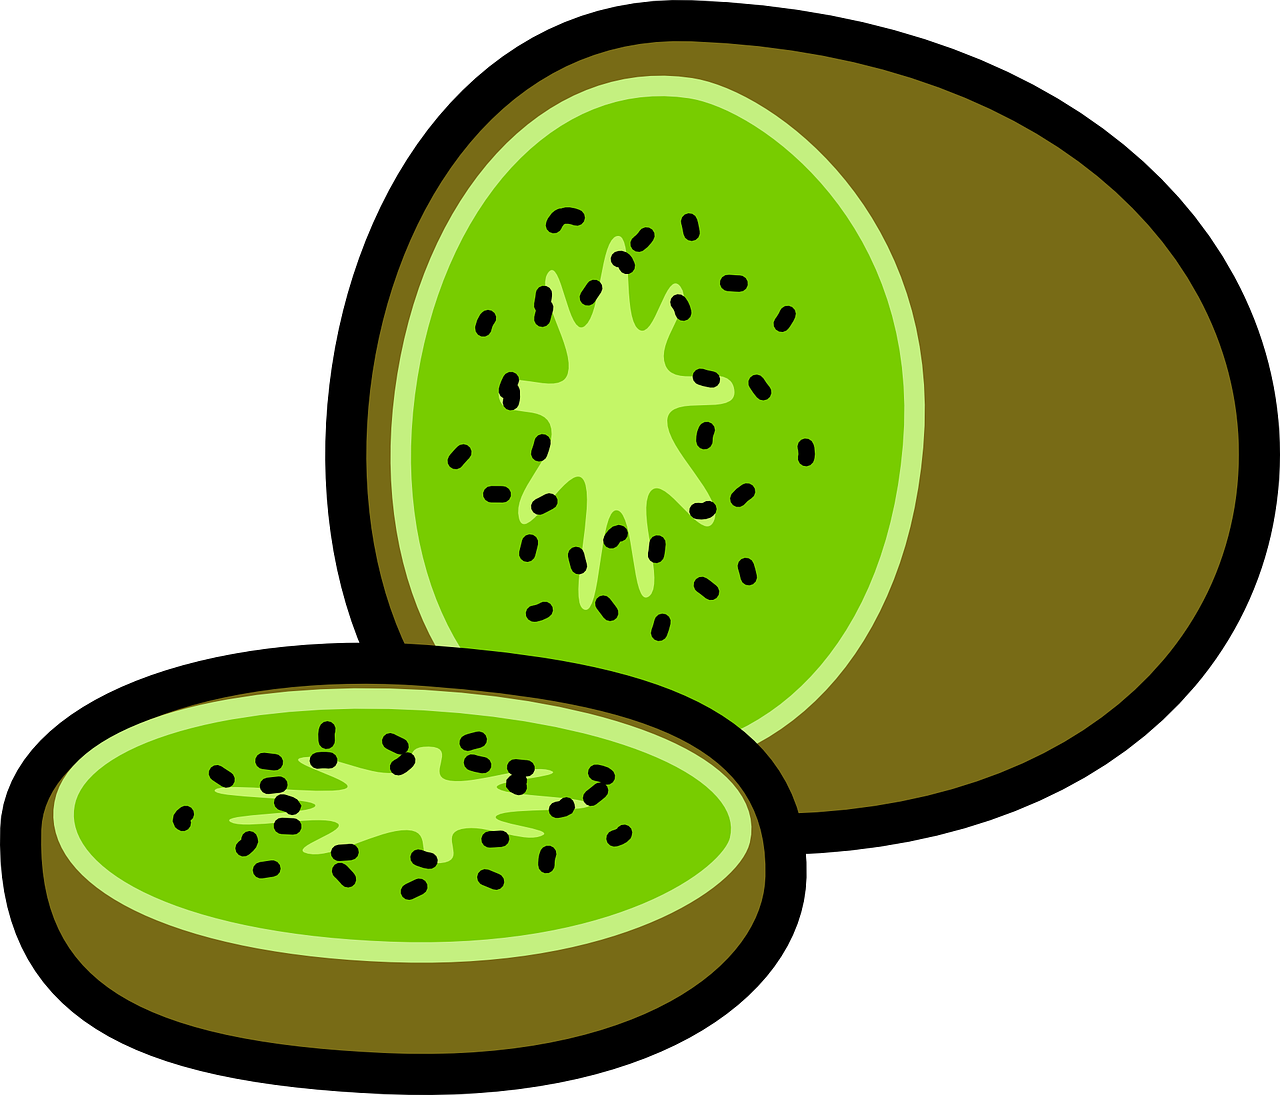 kiwi,kiwifruit,fruit,food,green,nutrition,sweet,dessert,slice,cut,free vector graphics,free pictures, free photos, free images, royalty free, free illustrations, public domain